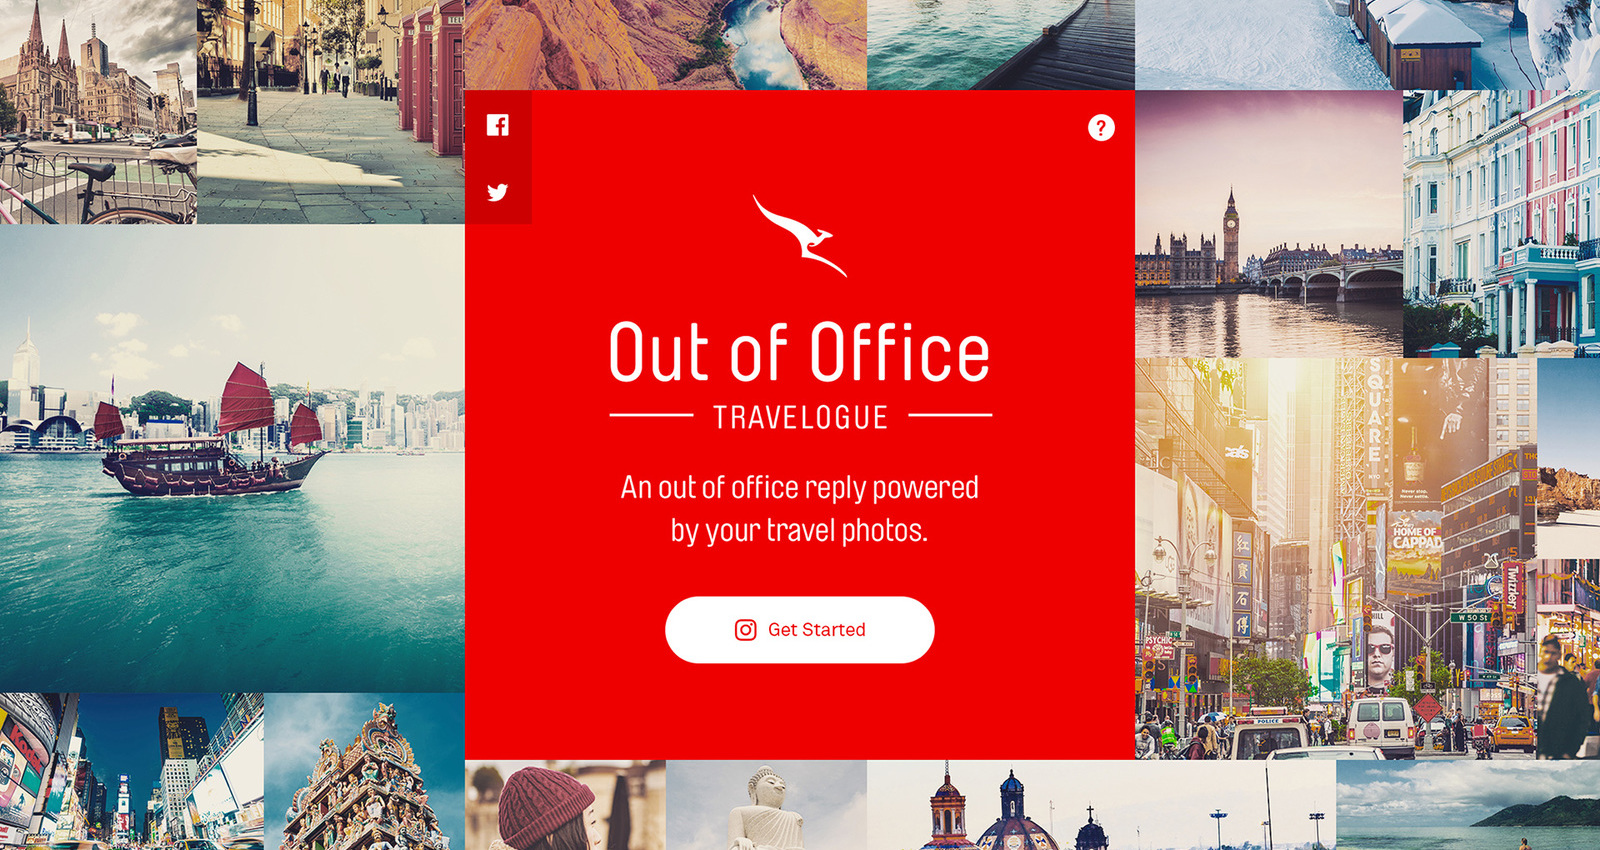 Qantas Out of Office Travelogue